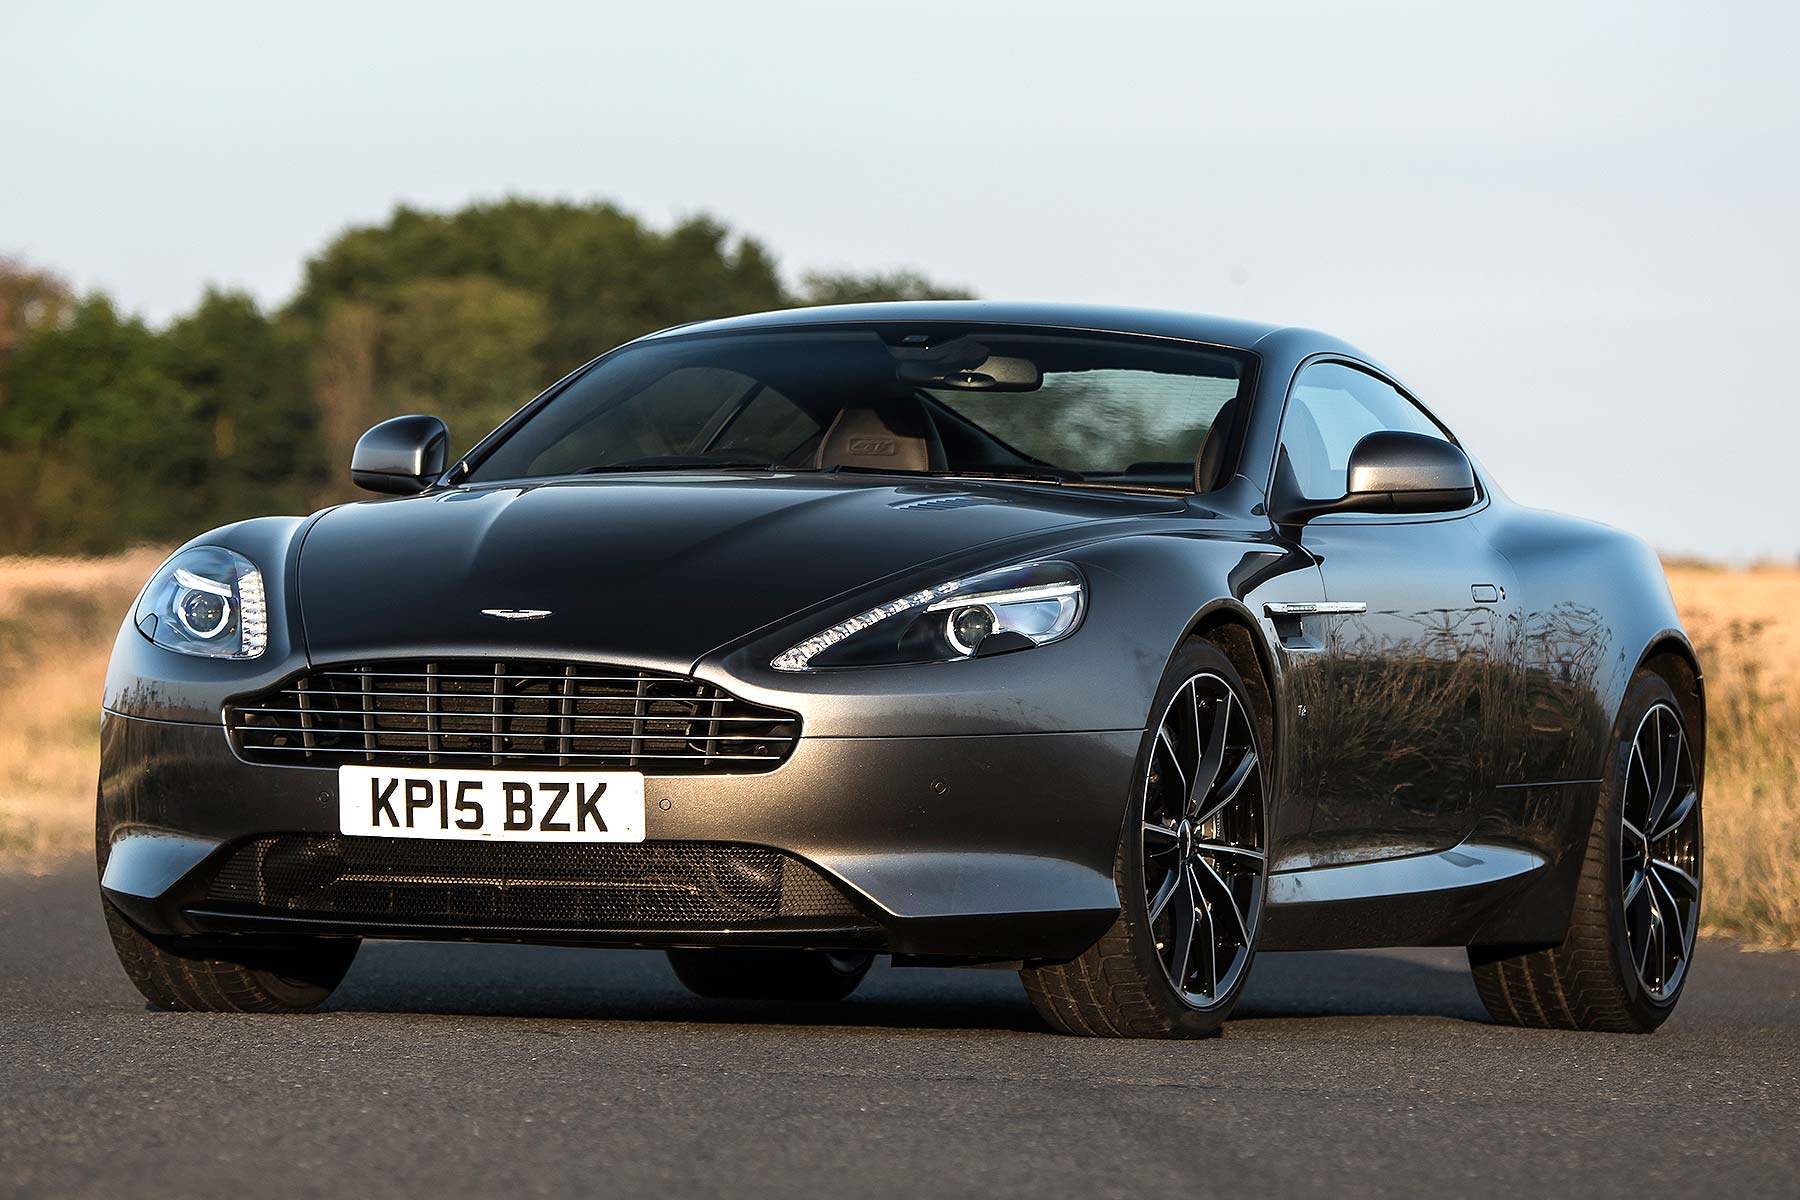 Aston Martin DB9 GT review: 2015 first drive - Motoring Research